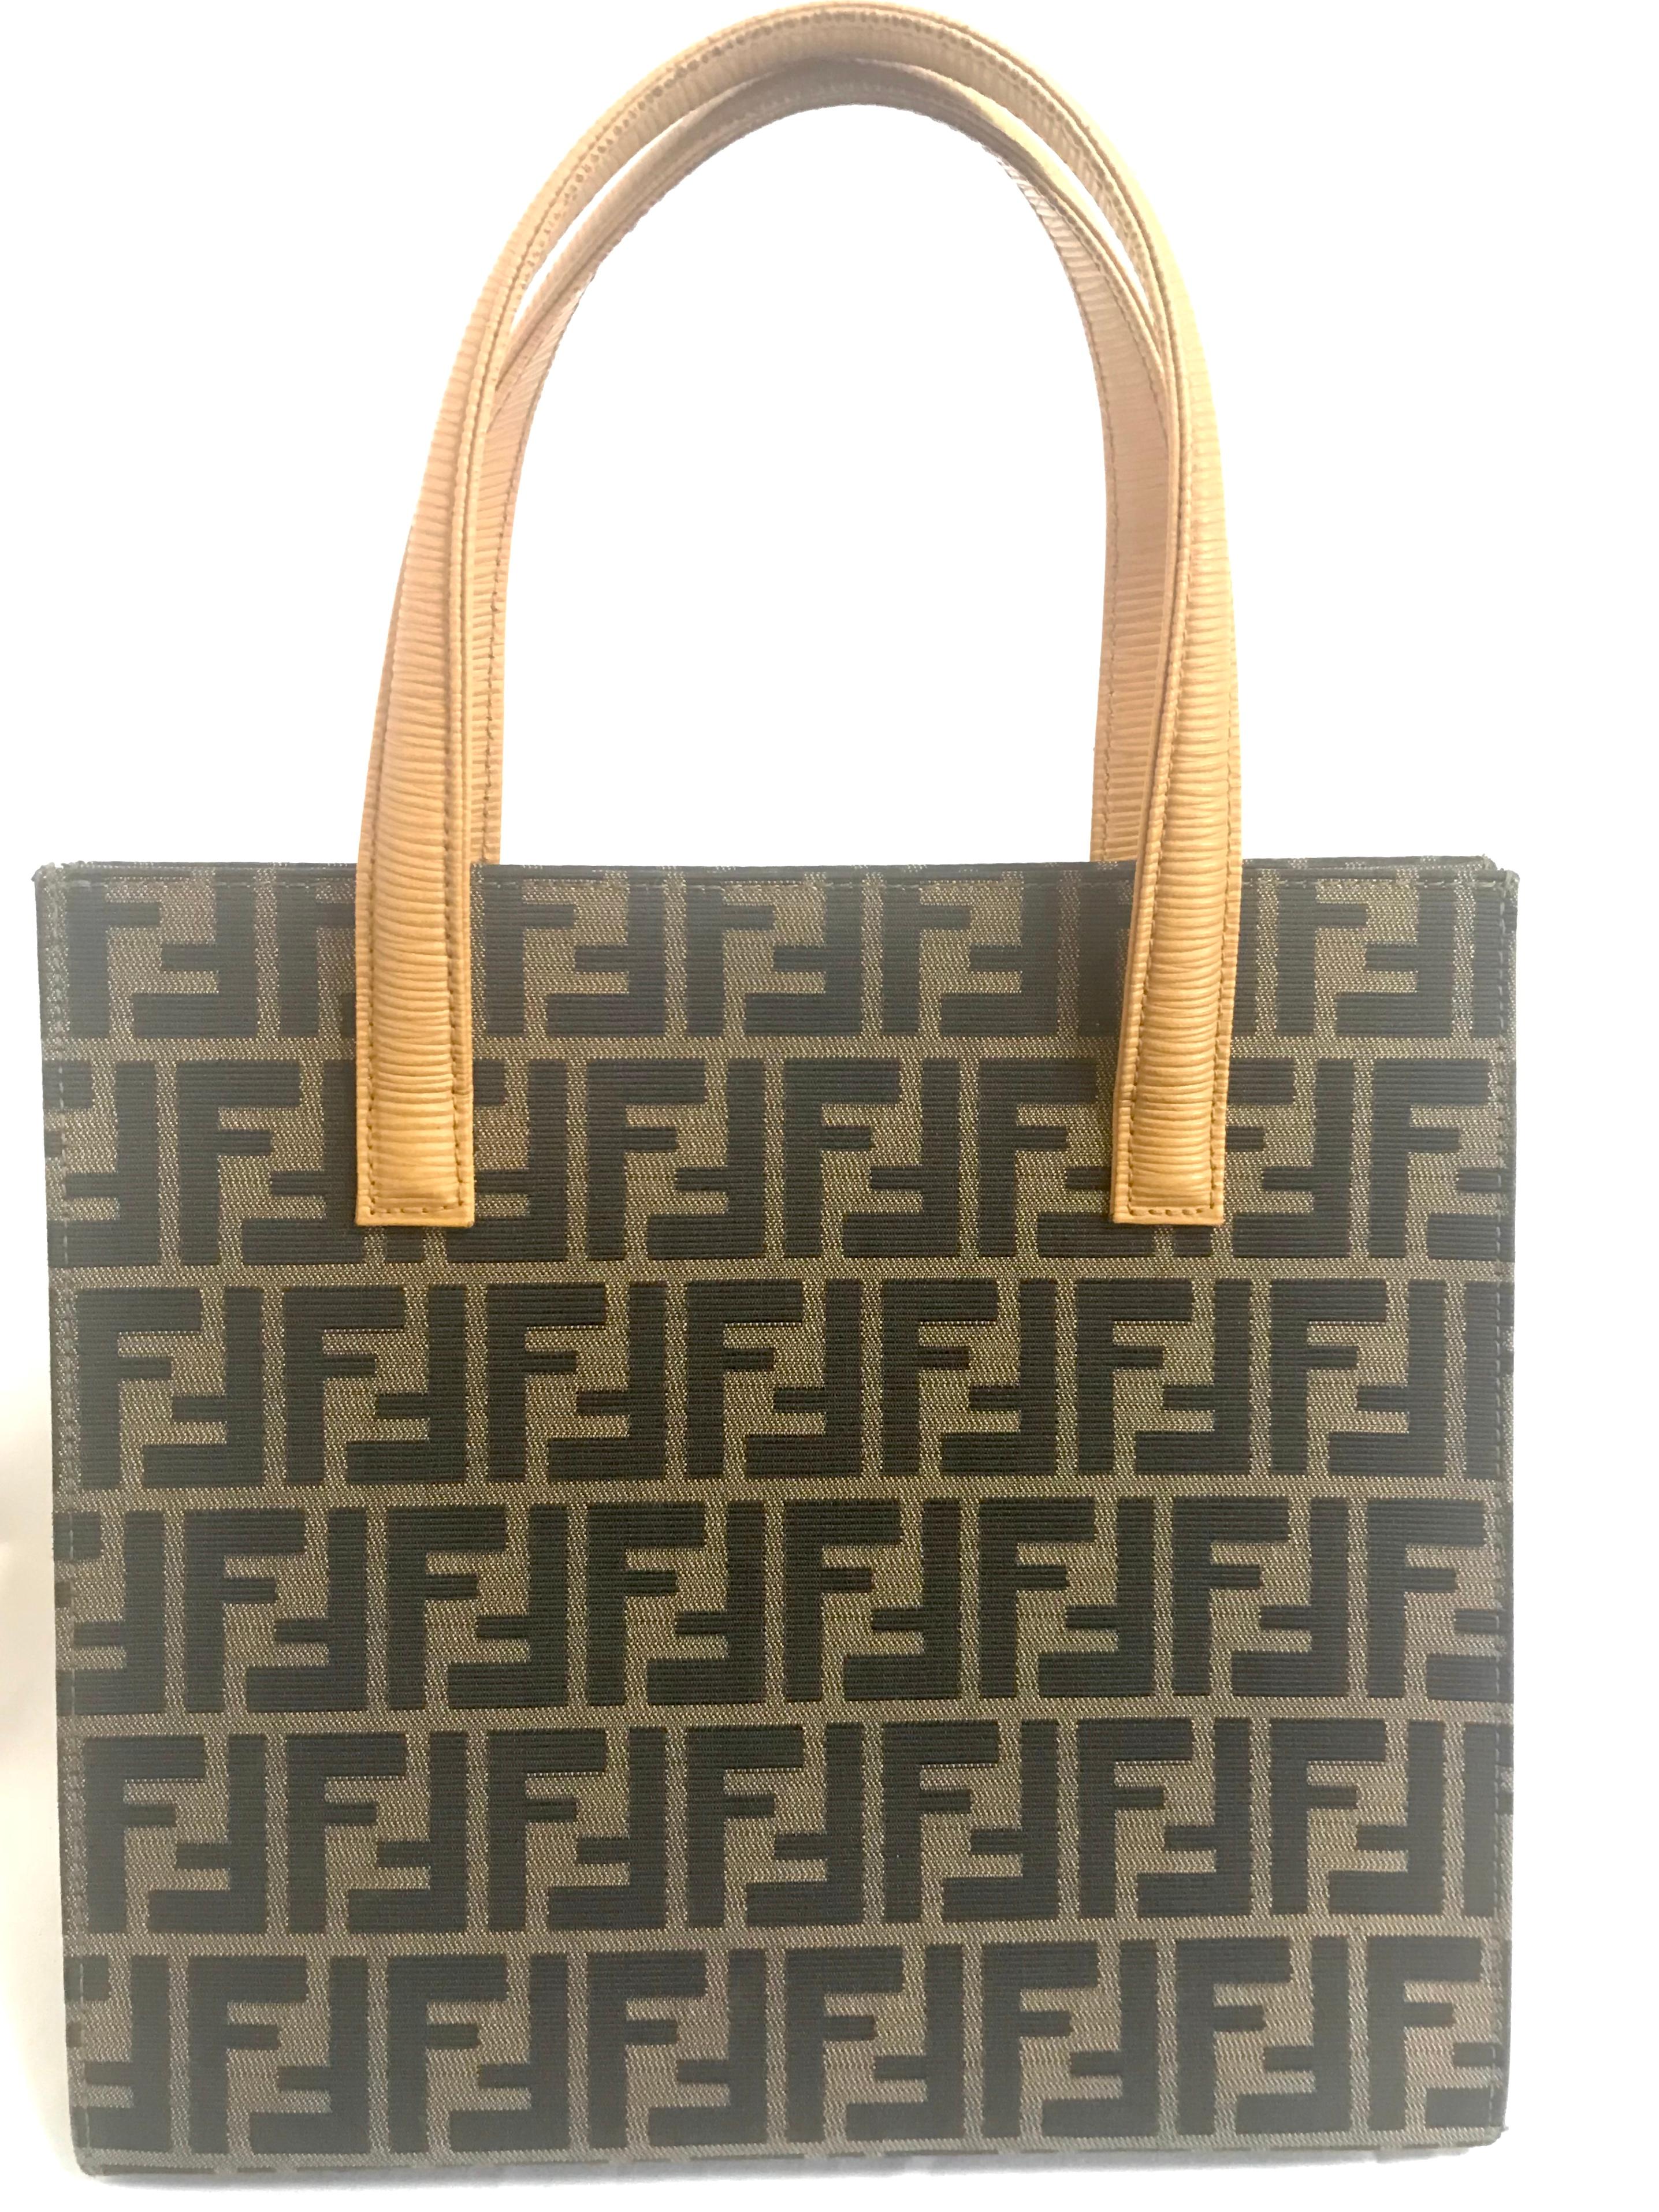 1990s. Vintage FENDI classic logo zukka jacquard and mustard yellow epi leather tote bag with golden closure at front.

If you are a FENDI vintage collector and lover, then this one will be your must-have piece.

This is a vintage one-of-a-kind